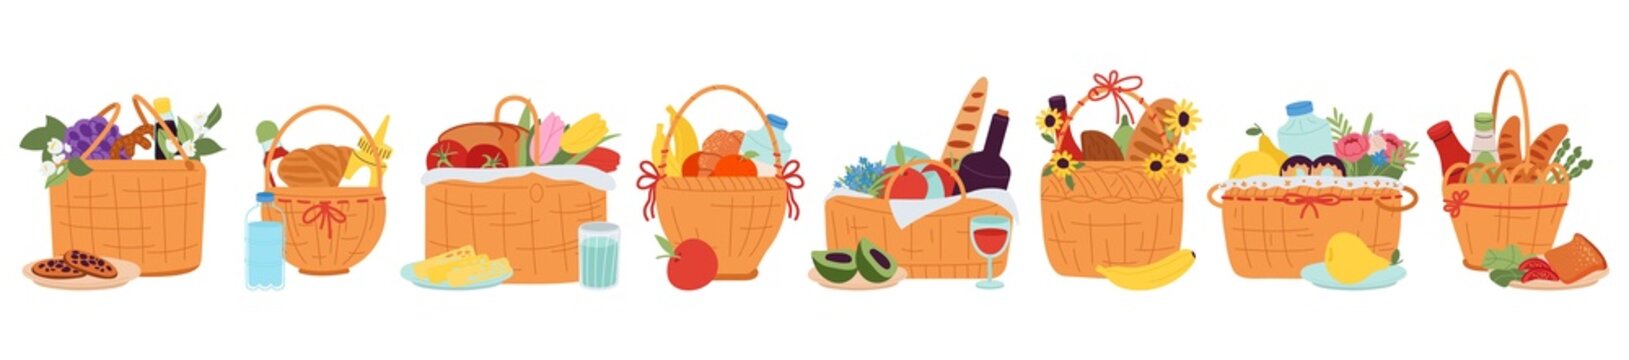 Picnic basket. Cartoon baskets collection, hamper with wine cheese meat and fruits. Summer outdoor rest elements, dinner or lunch on nature decent vector set